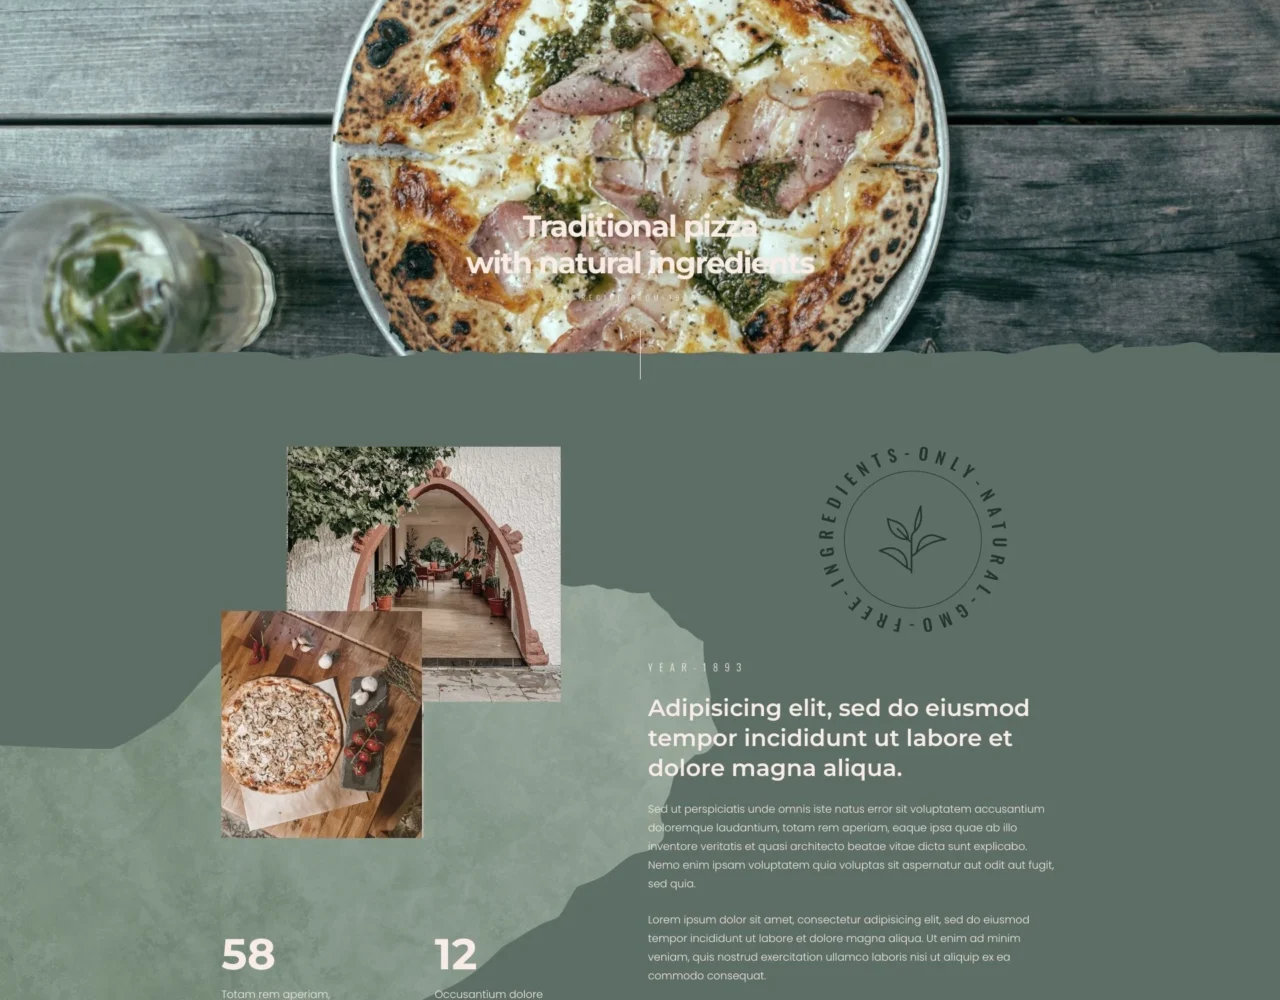 Pizzeria store page built website for our page ASATA.io.